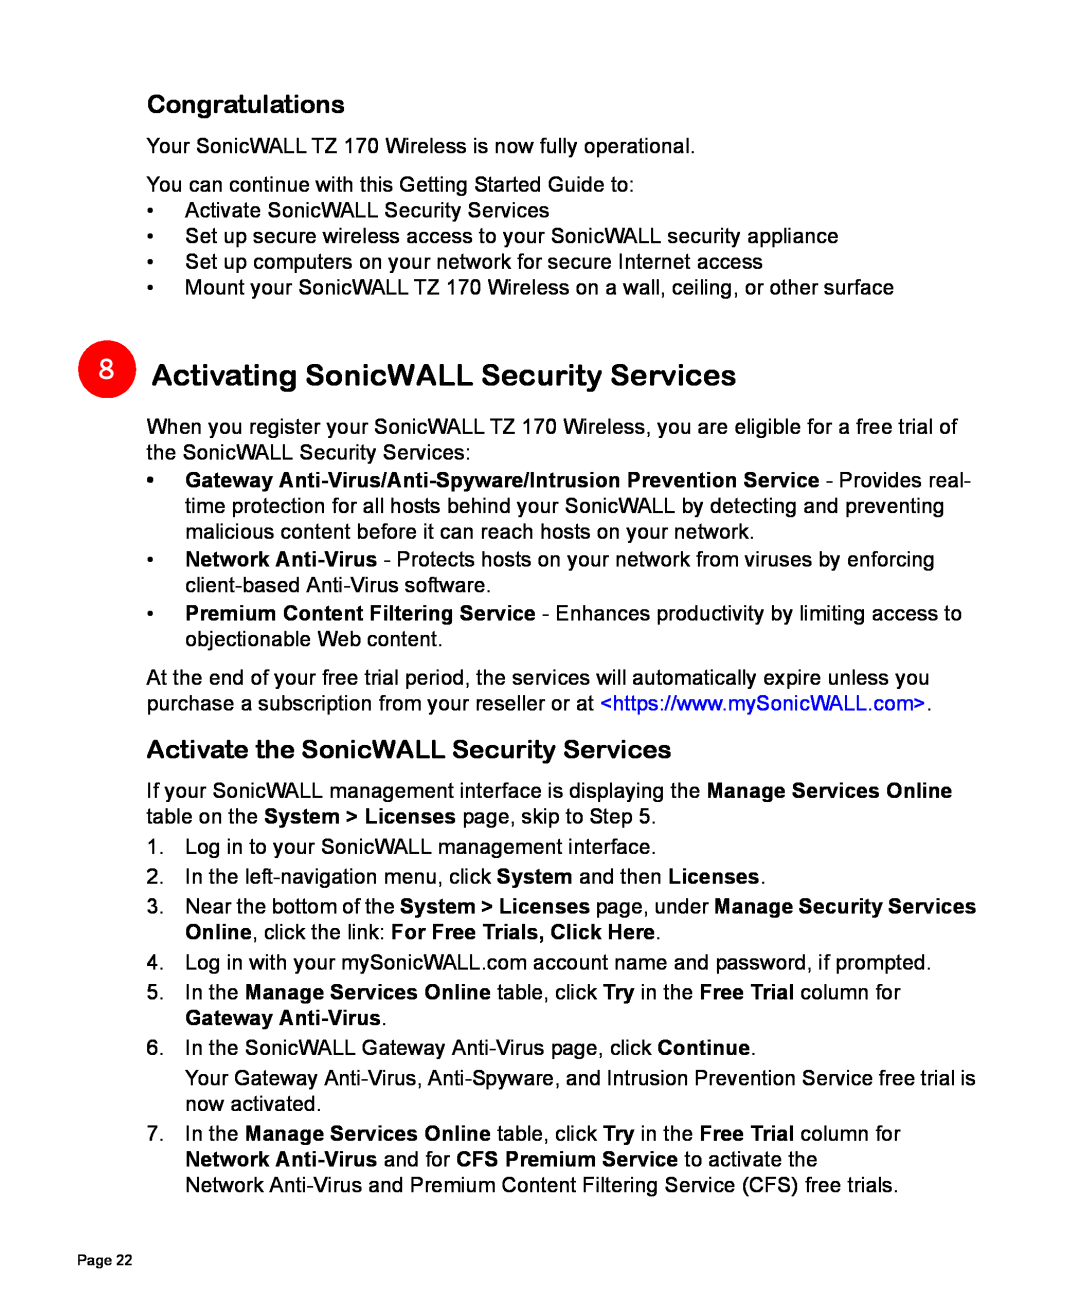 SonicWALL 170 manual Activating SonicWALL Security Services, Congratulations, Activate the SonicWALL Security Services 